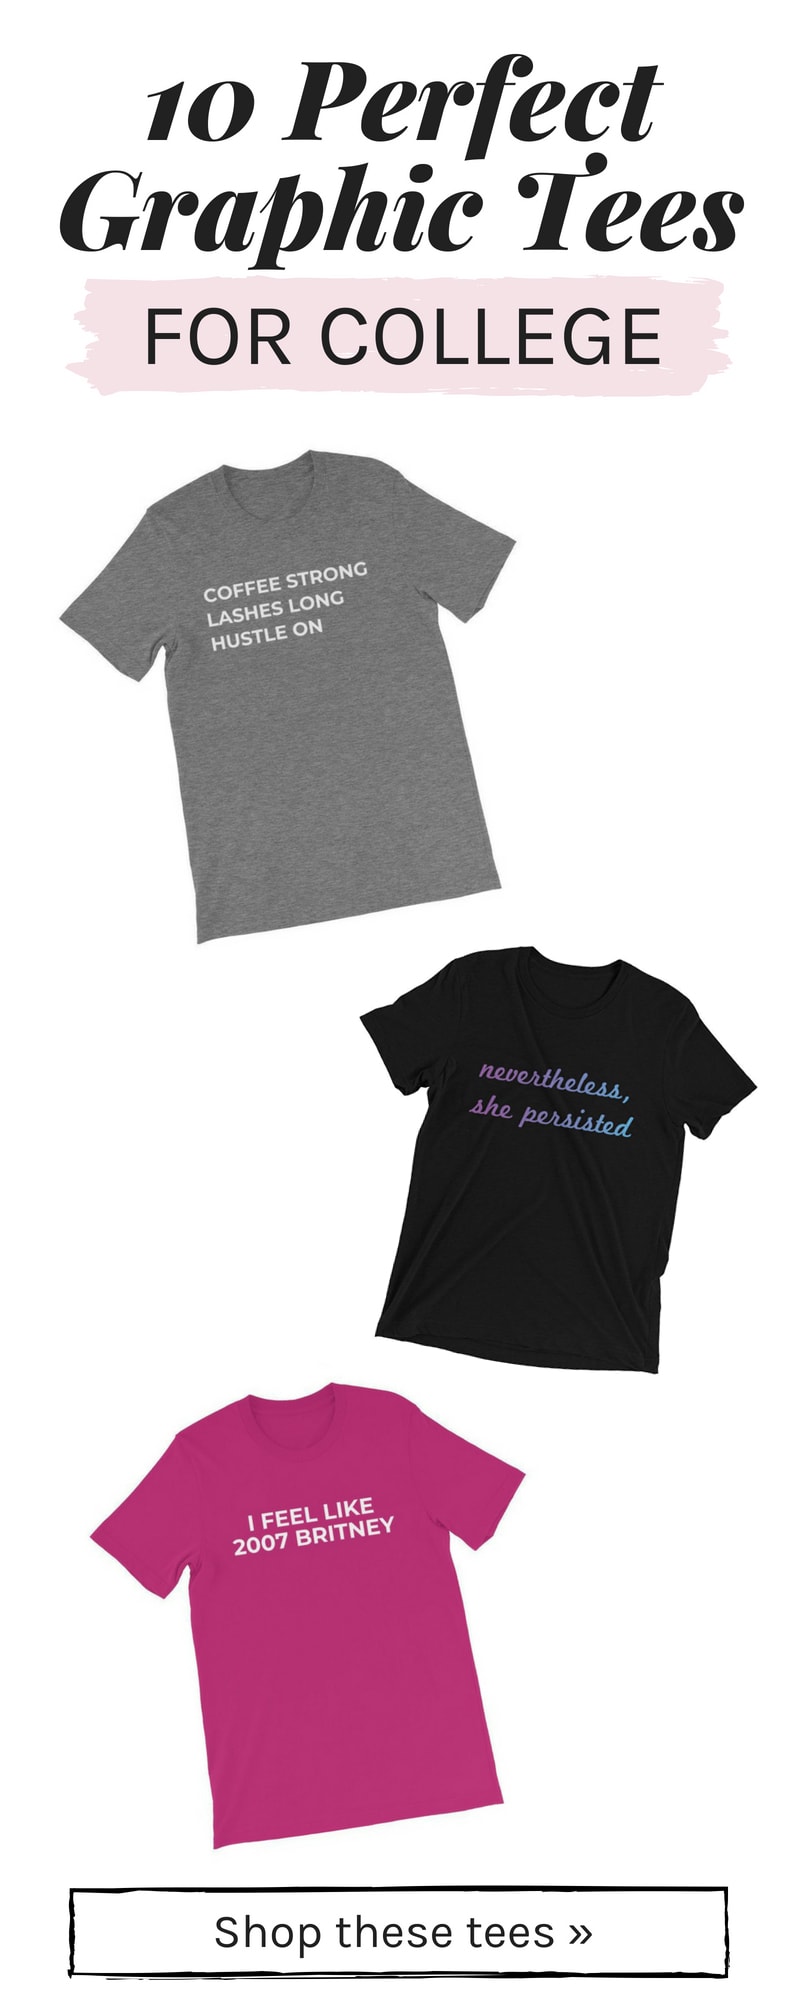 Cute graphic tees for college from Feel Great Goods